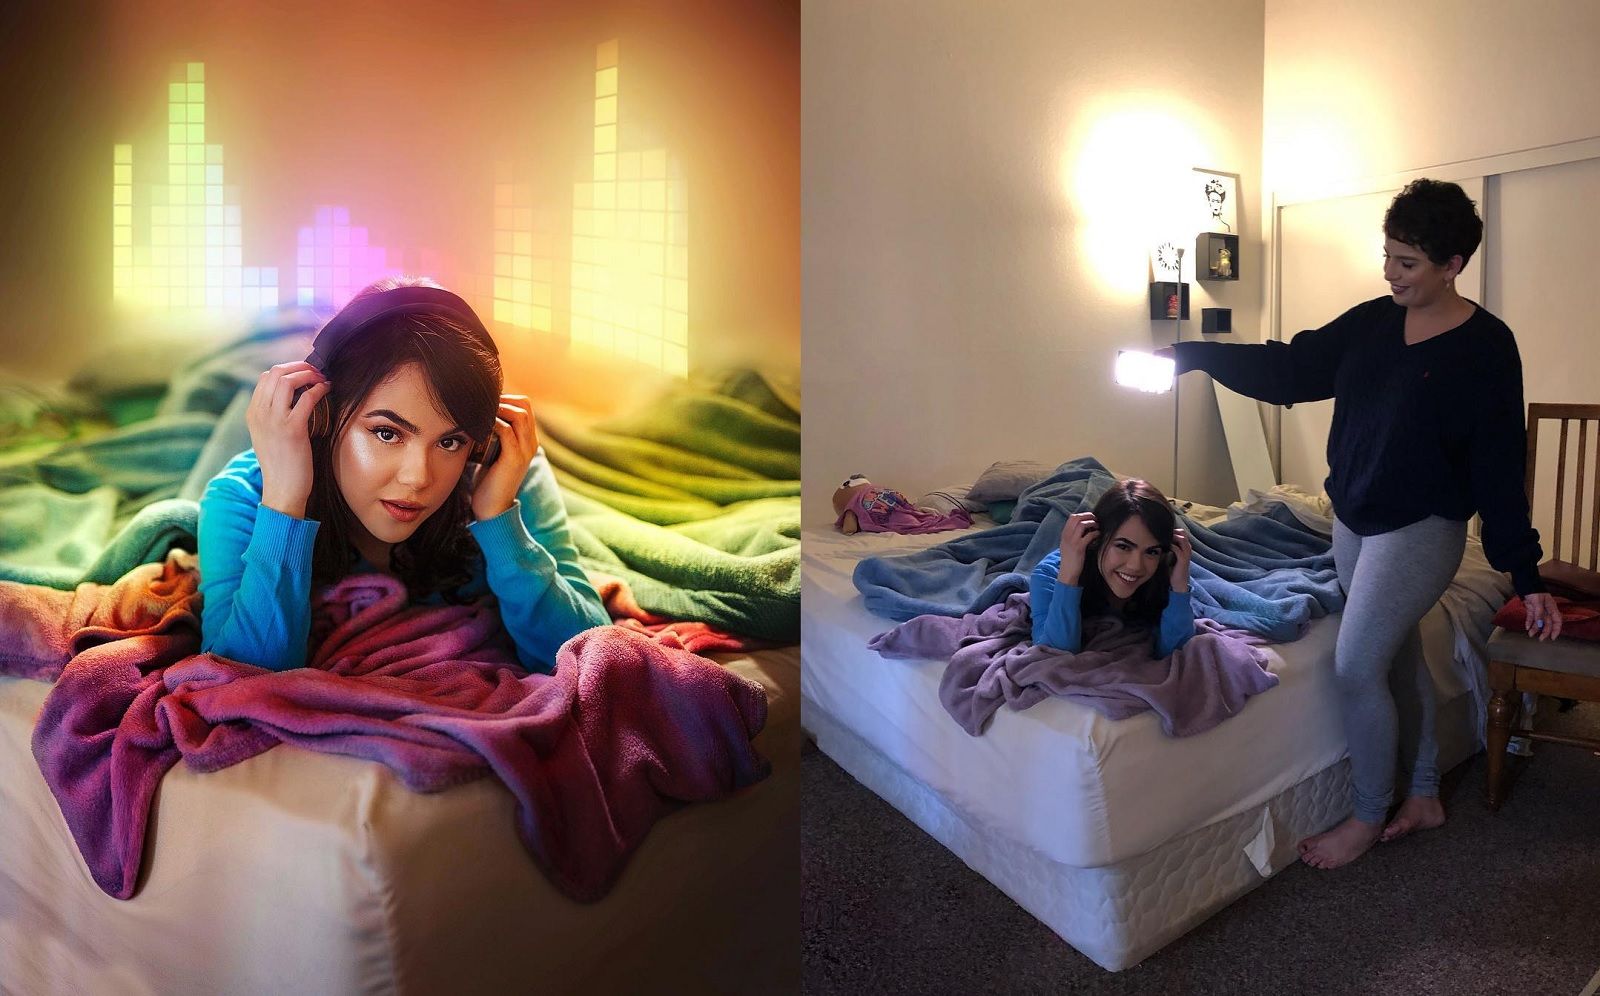 Behind The Scenes Of Instagram This Artist Shows Us What Goes Into Beautiful Snaps image 11